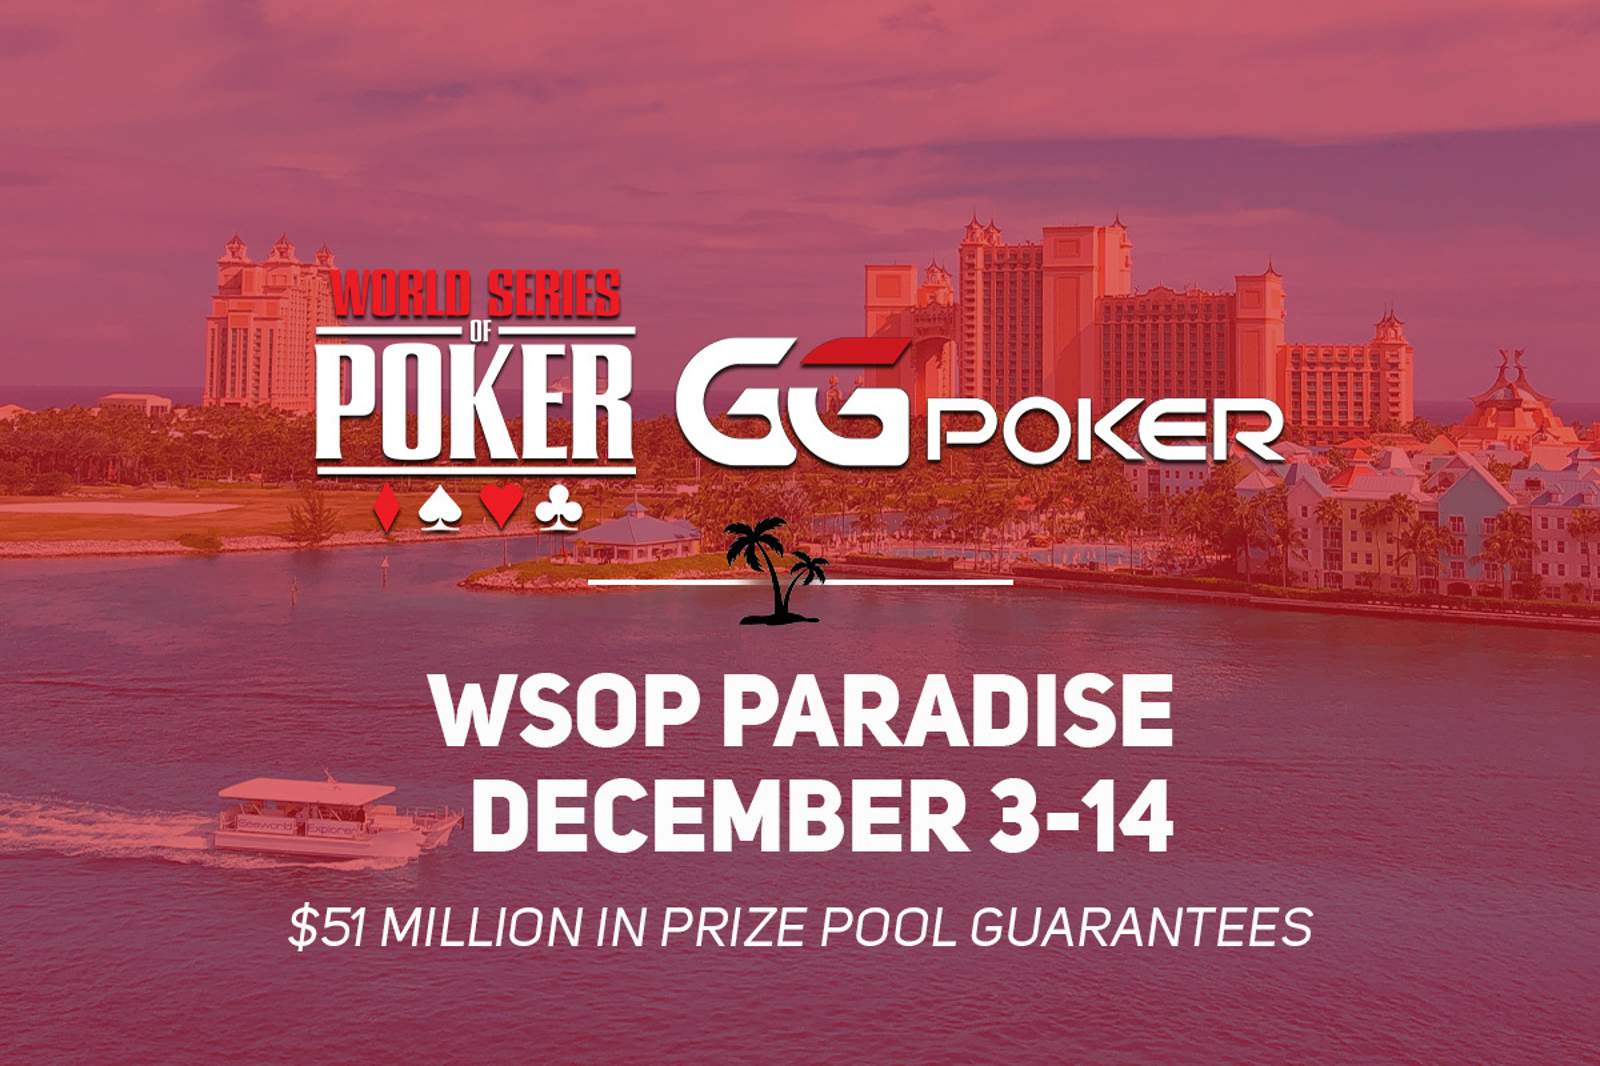 WSOP Paradise Schedule Released: $51 Million in Prize Pool Guarantees